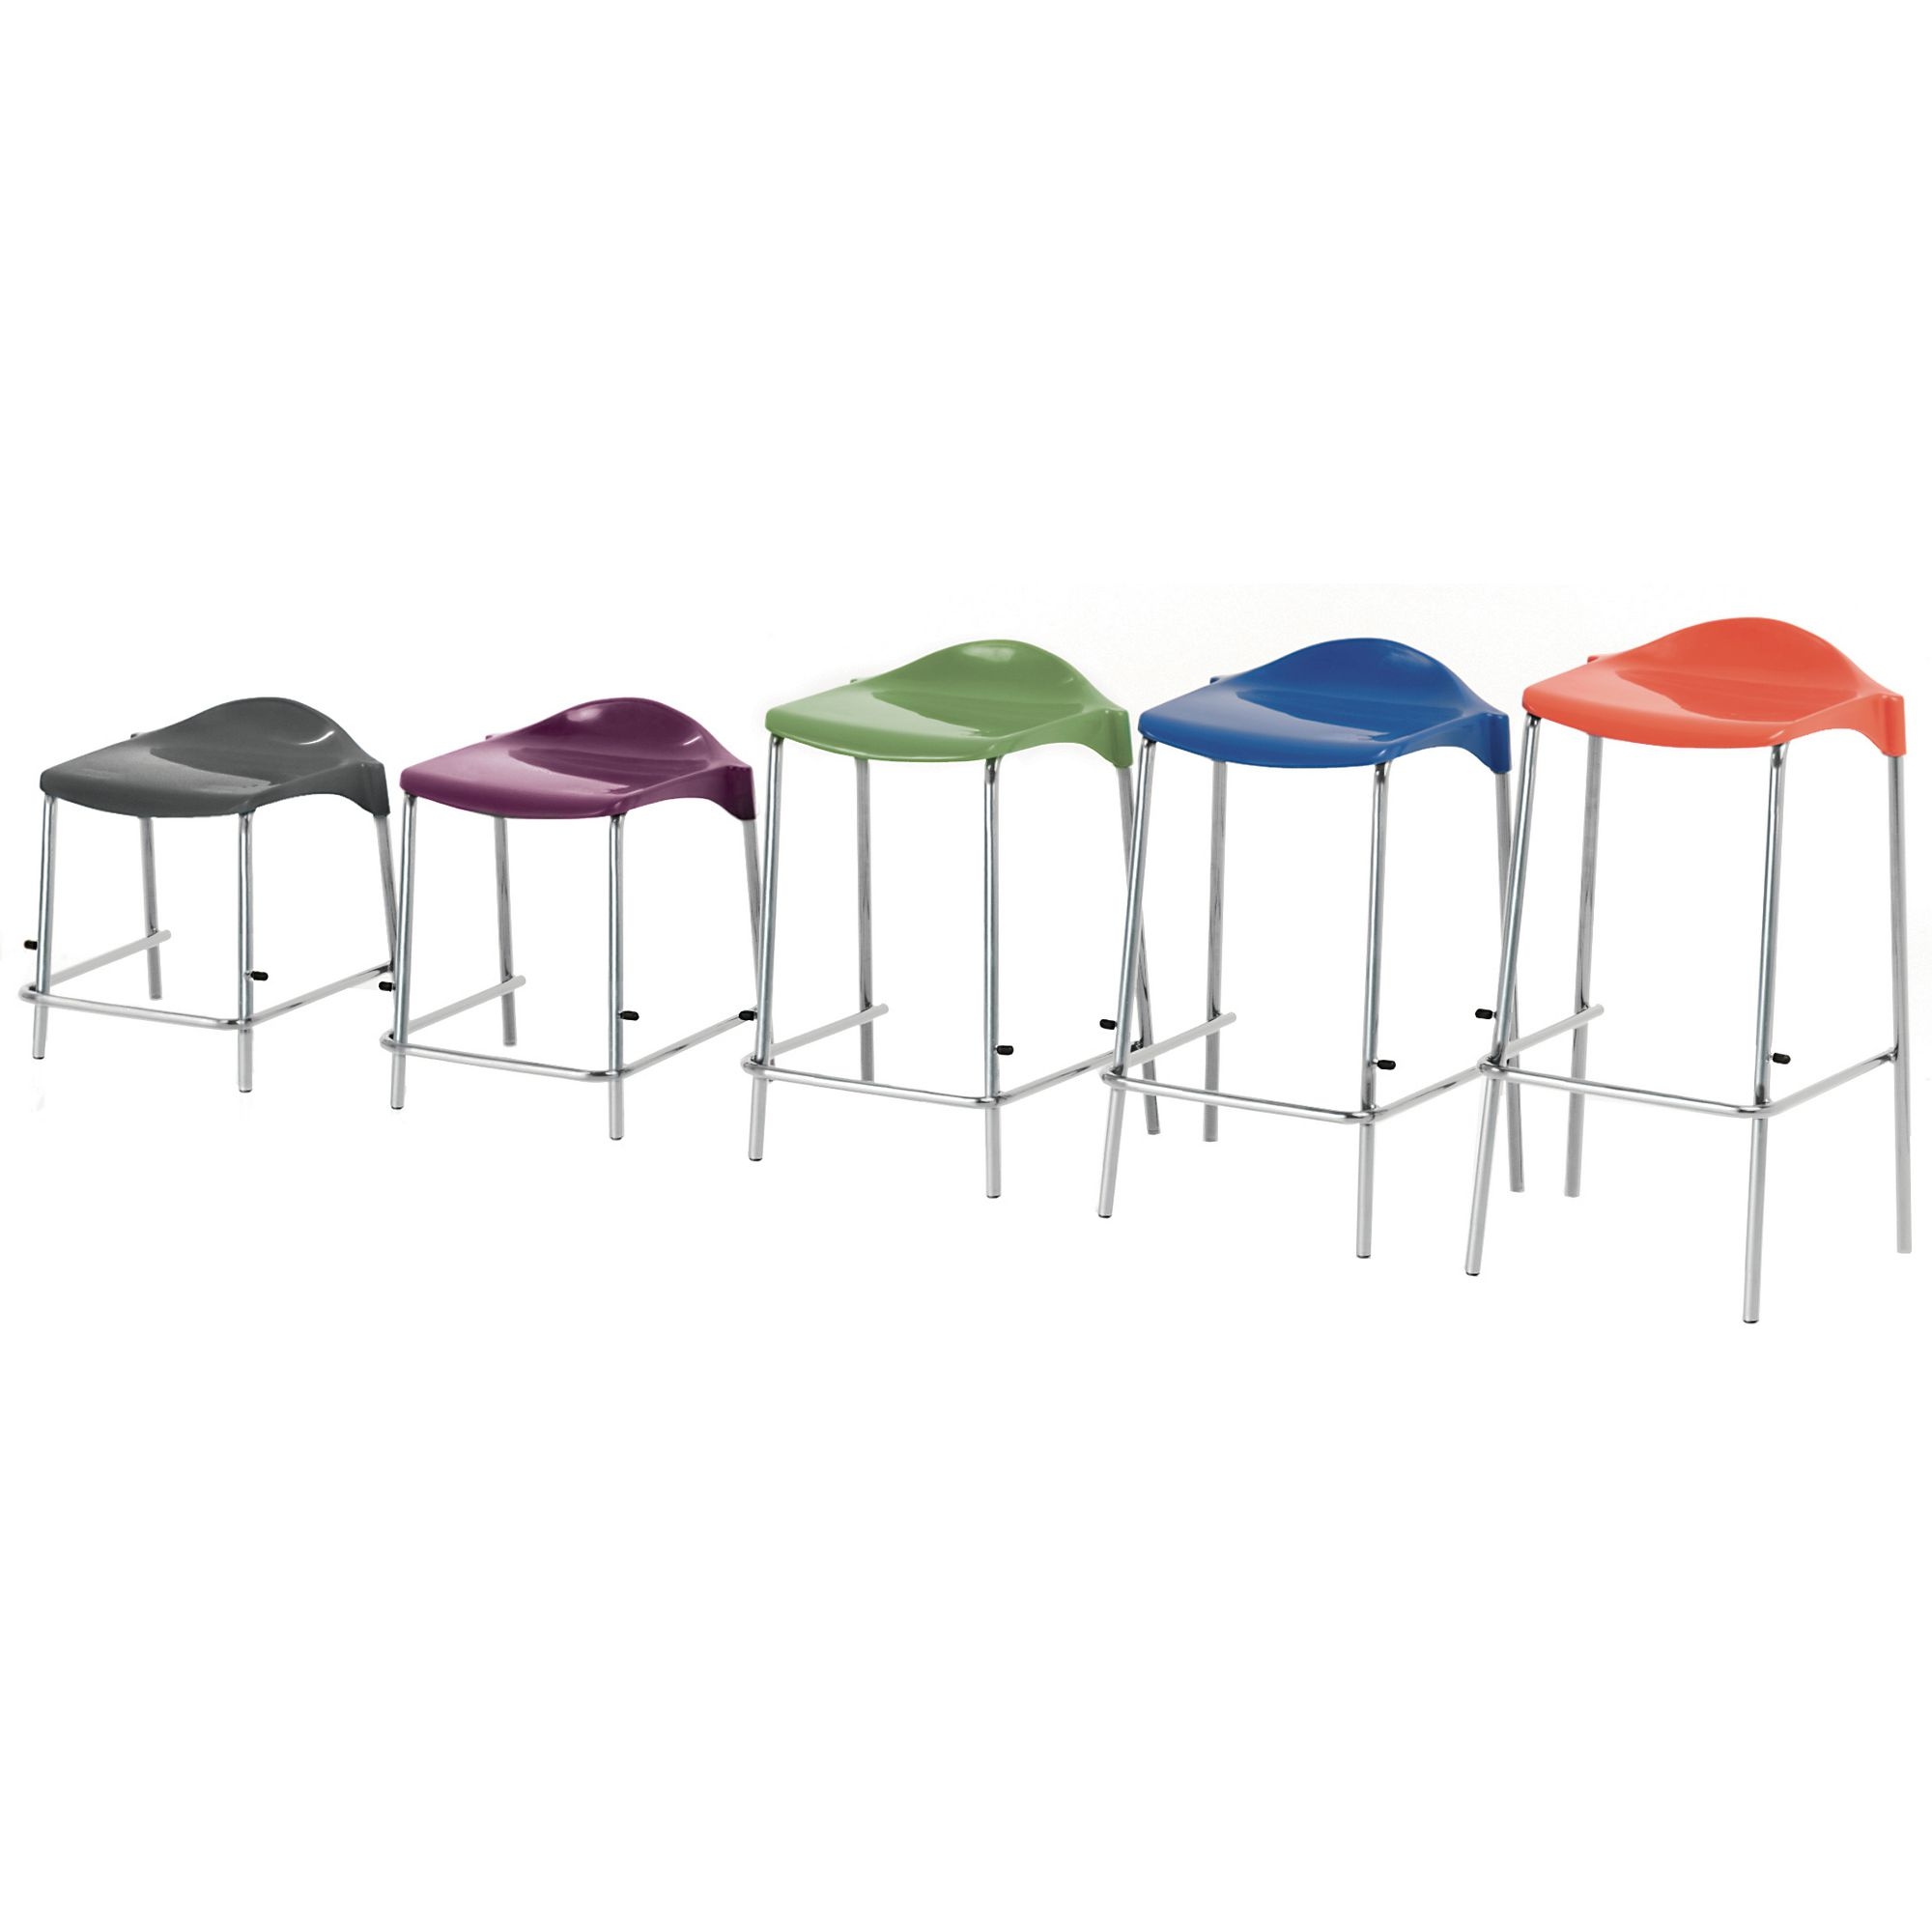 WSM four Legged Stool - Seat height: 685mm - Lime